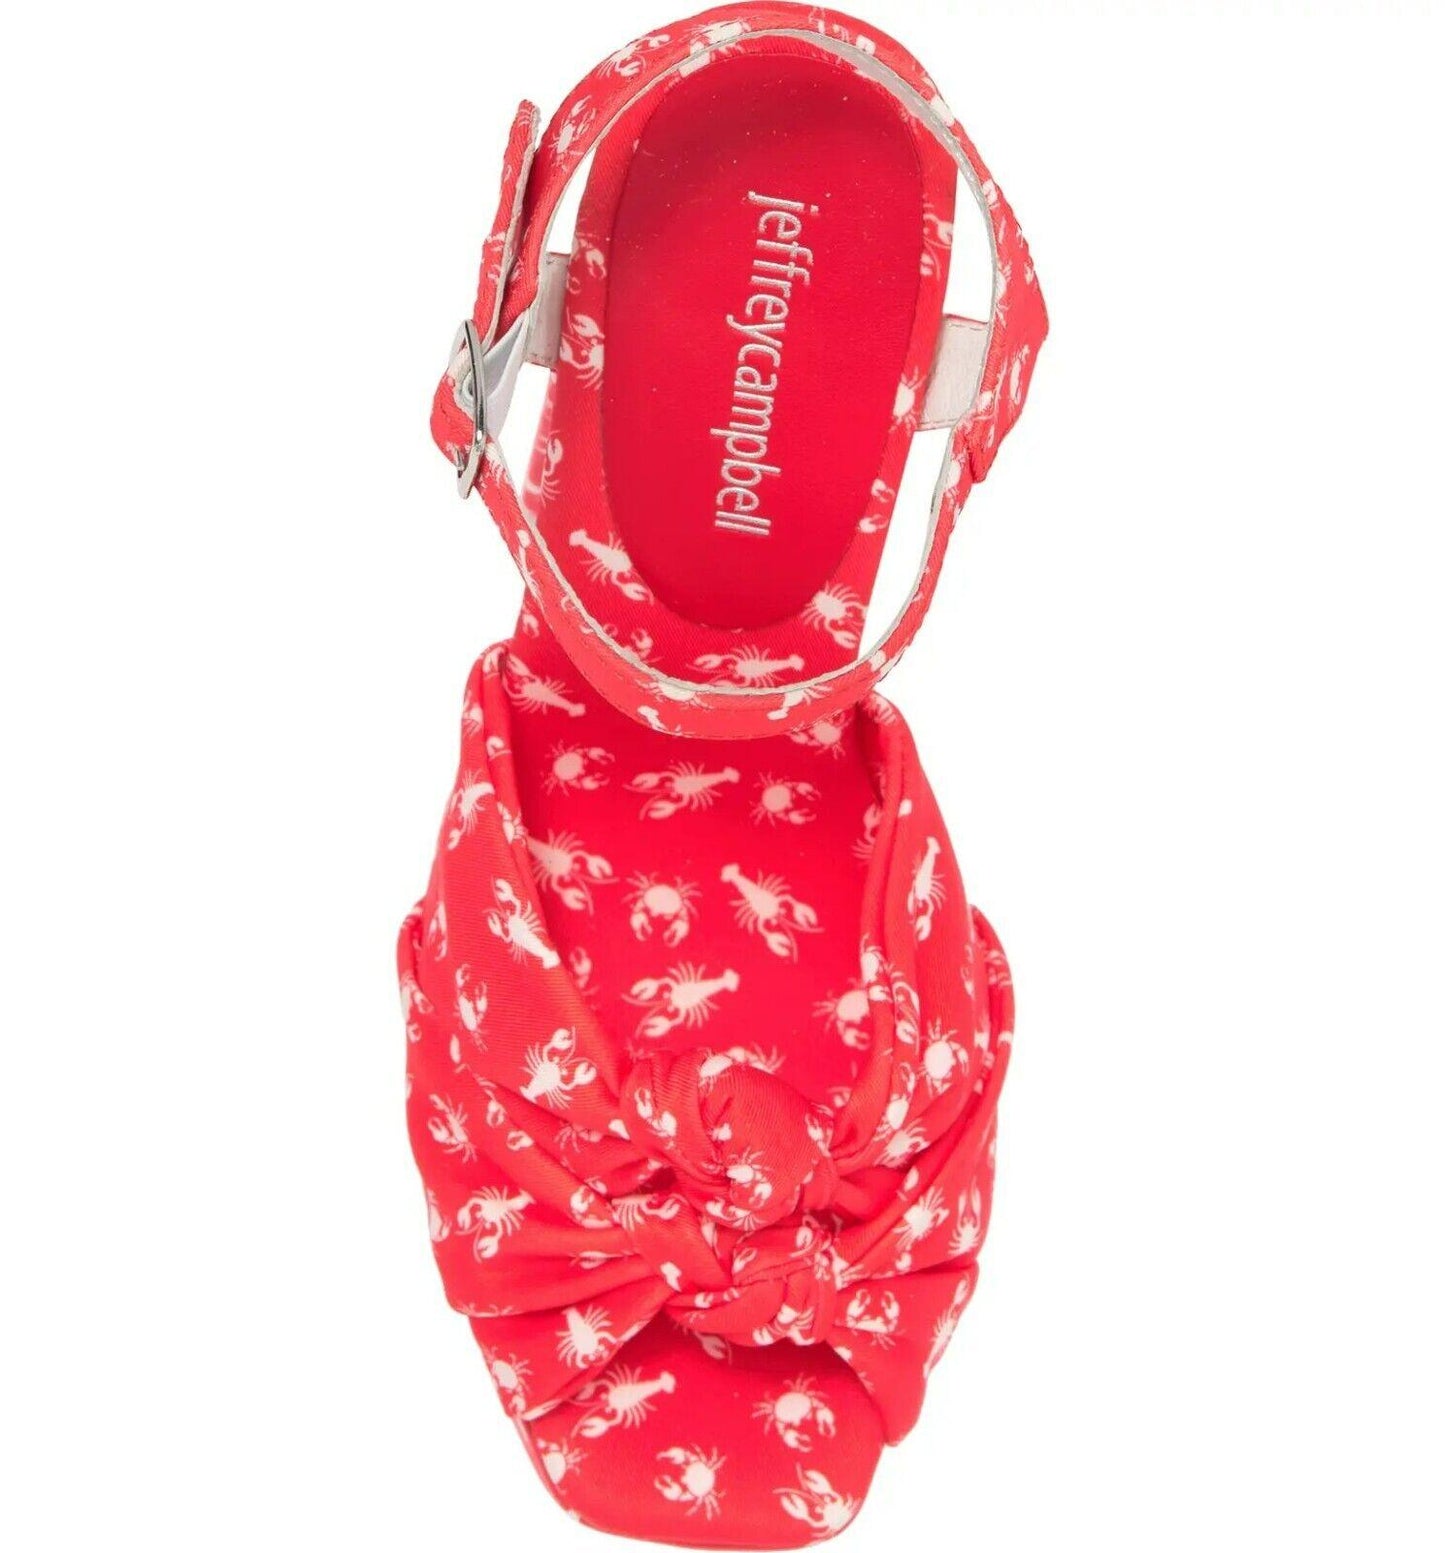 Jeffrey Campbell  Red Platform Sandal Lobsters and Crabs Print Knotted Straps Size US 8 - SVNYFancy